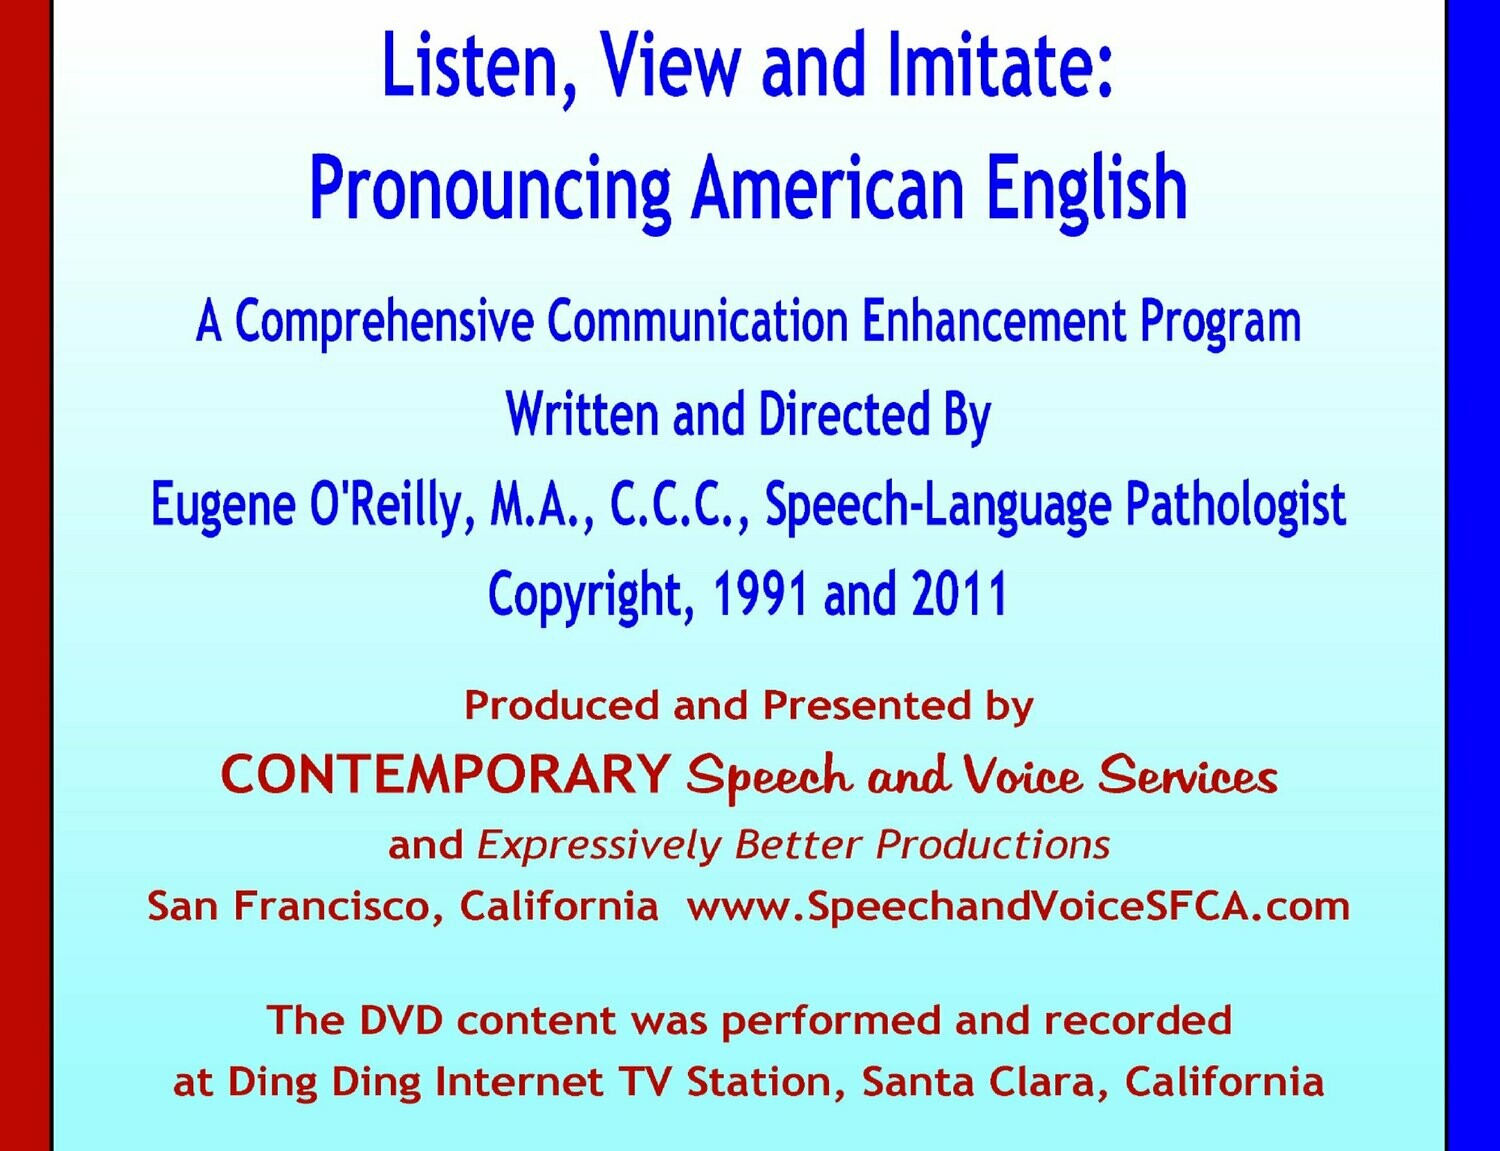 Listen, View and Imitate: Pronouncing American English - 
8 Discs DVD-ROM Kit and Guide Booklet